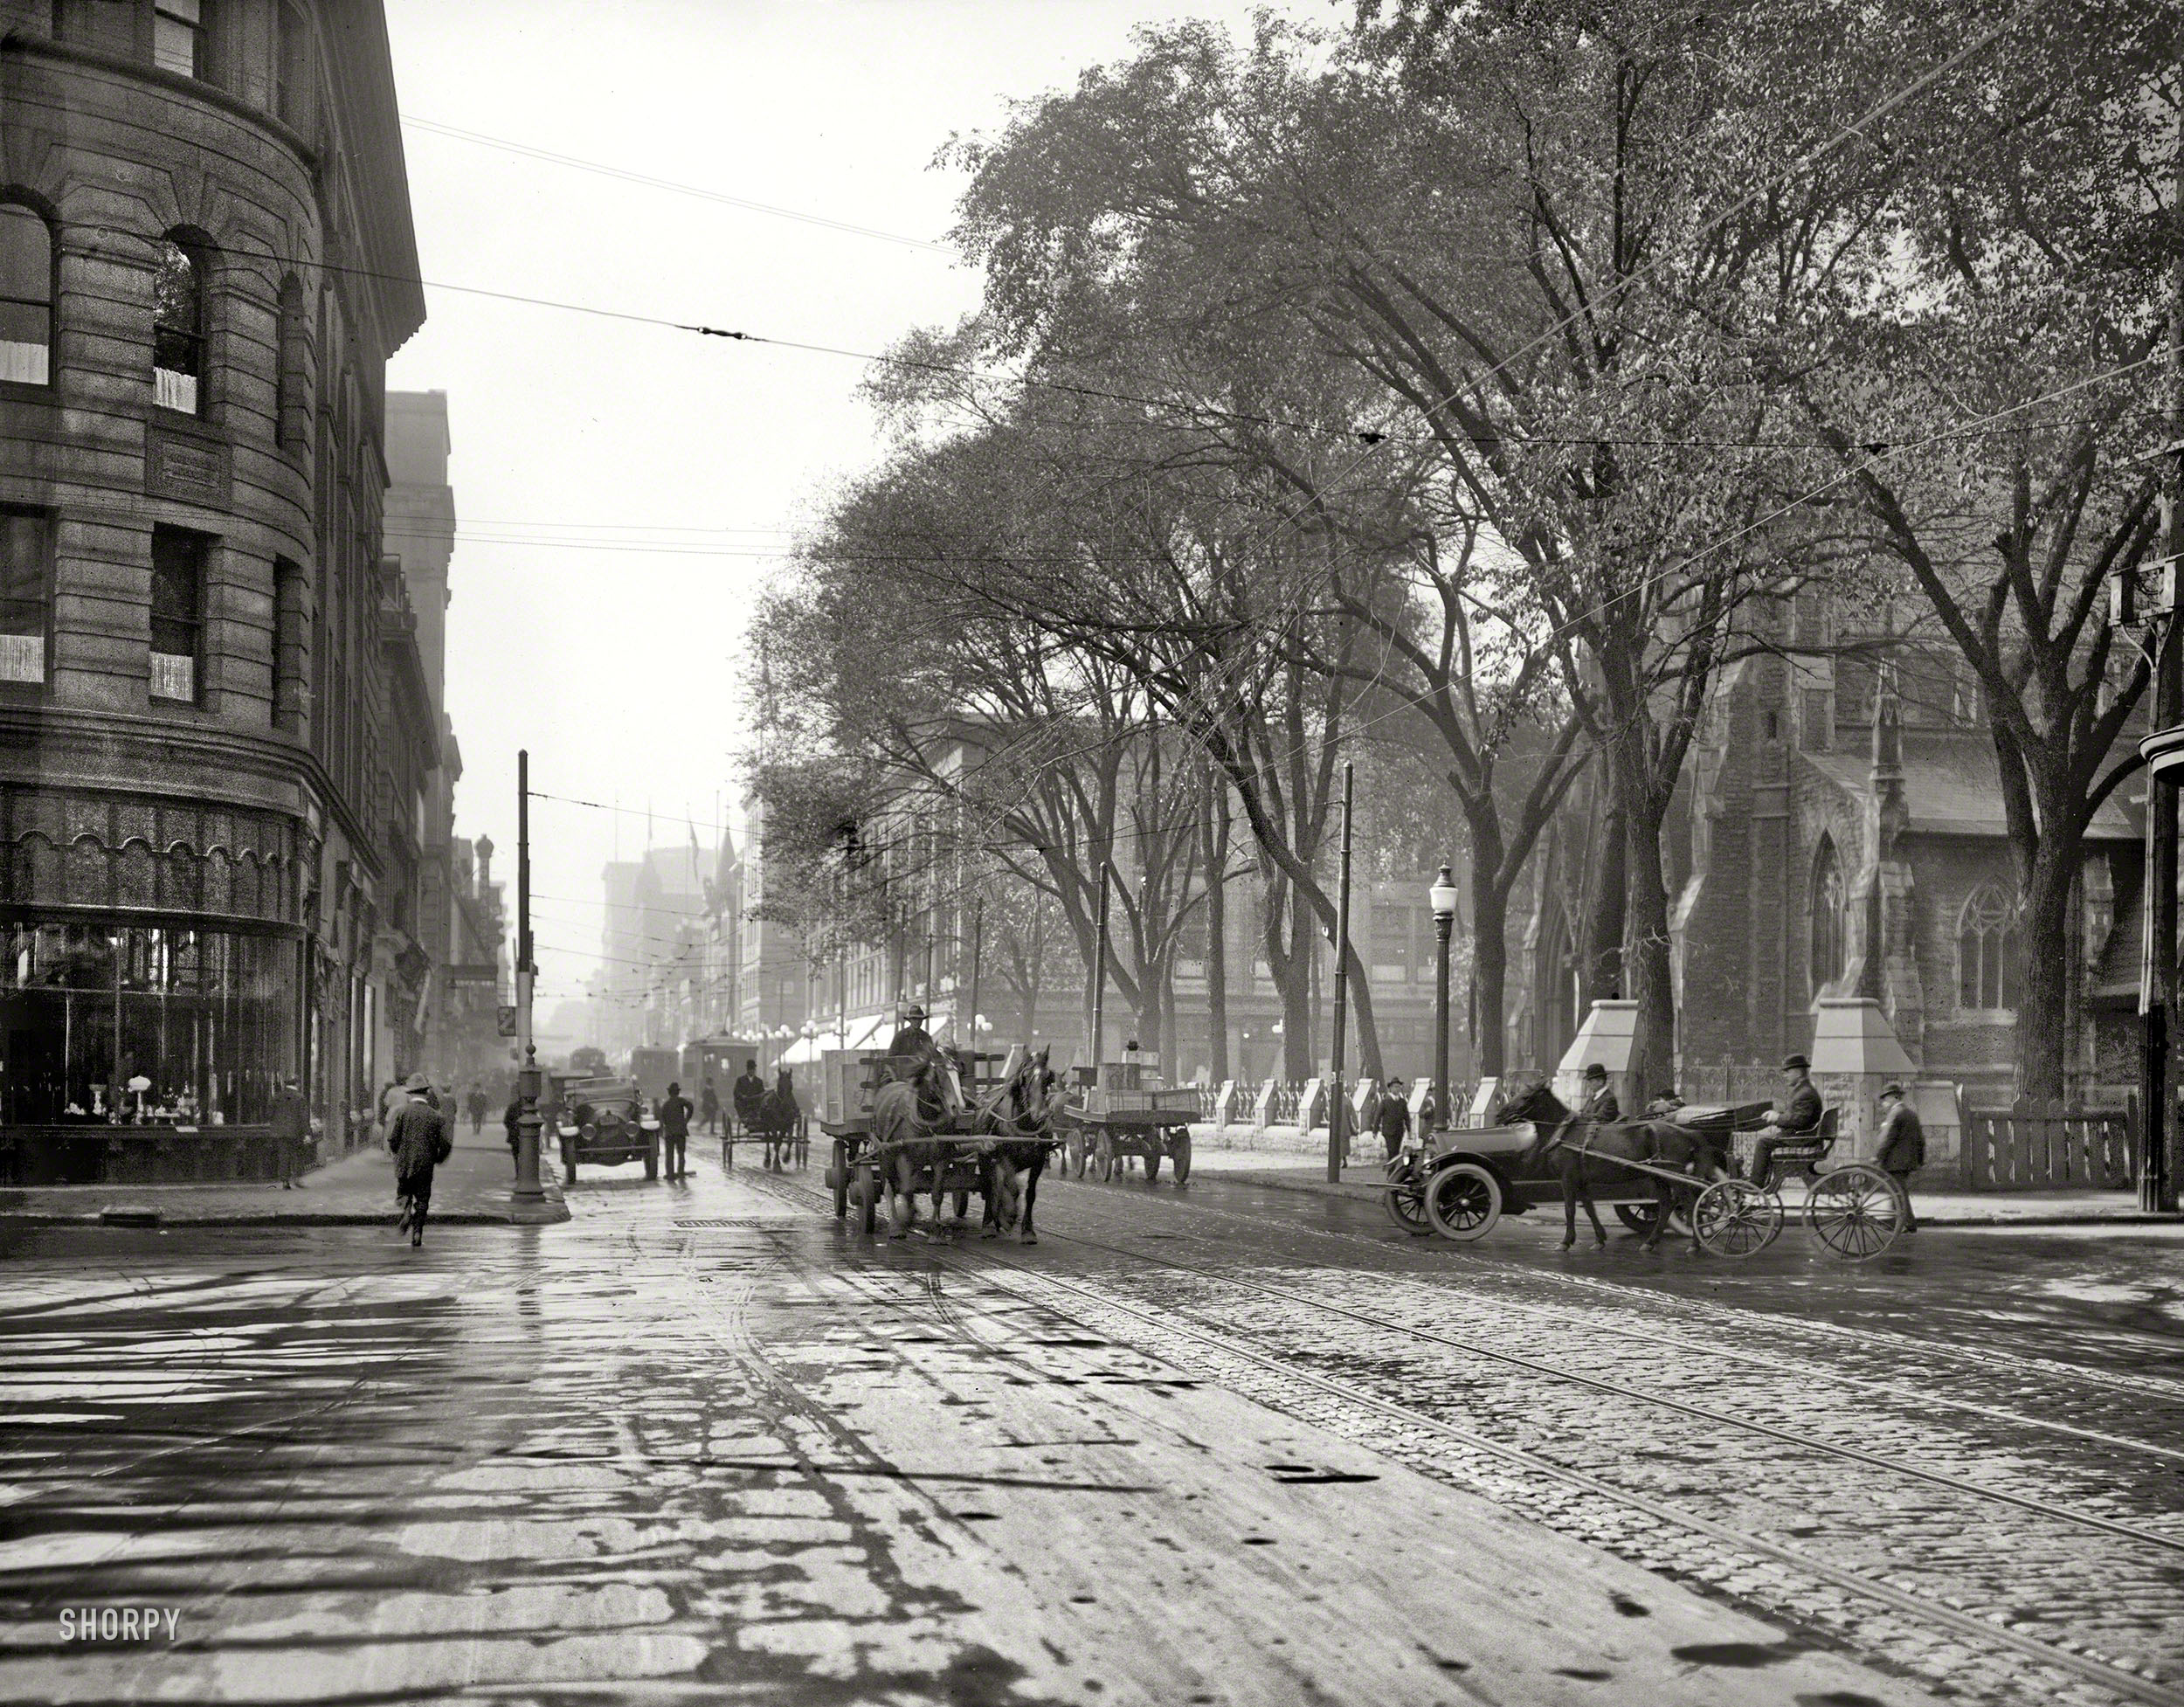 Circa 1916. "St. Catherine Street, Montreal, Quebec." Je me souviens. 8x10 inch dry plate glass negative, Detroit Publishing Company. View full size.